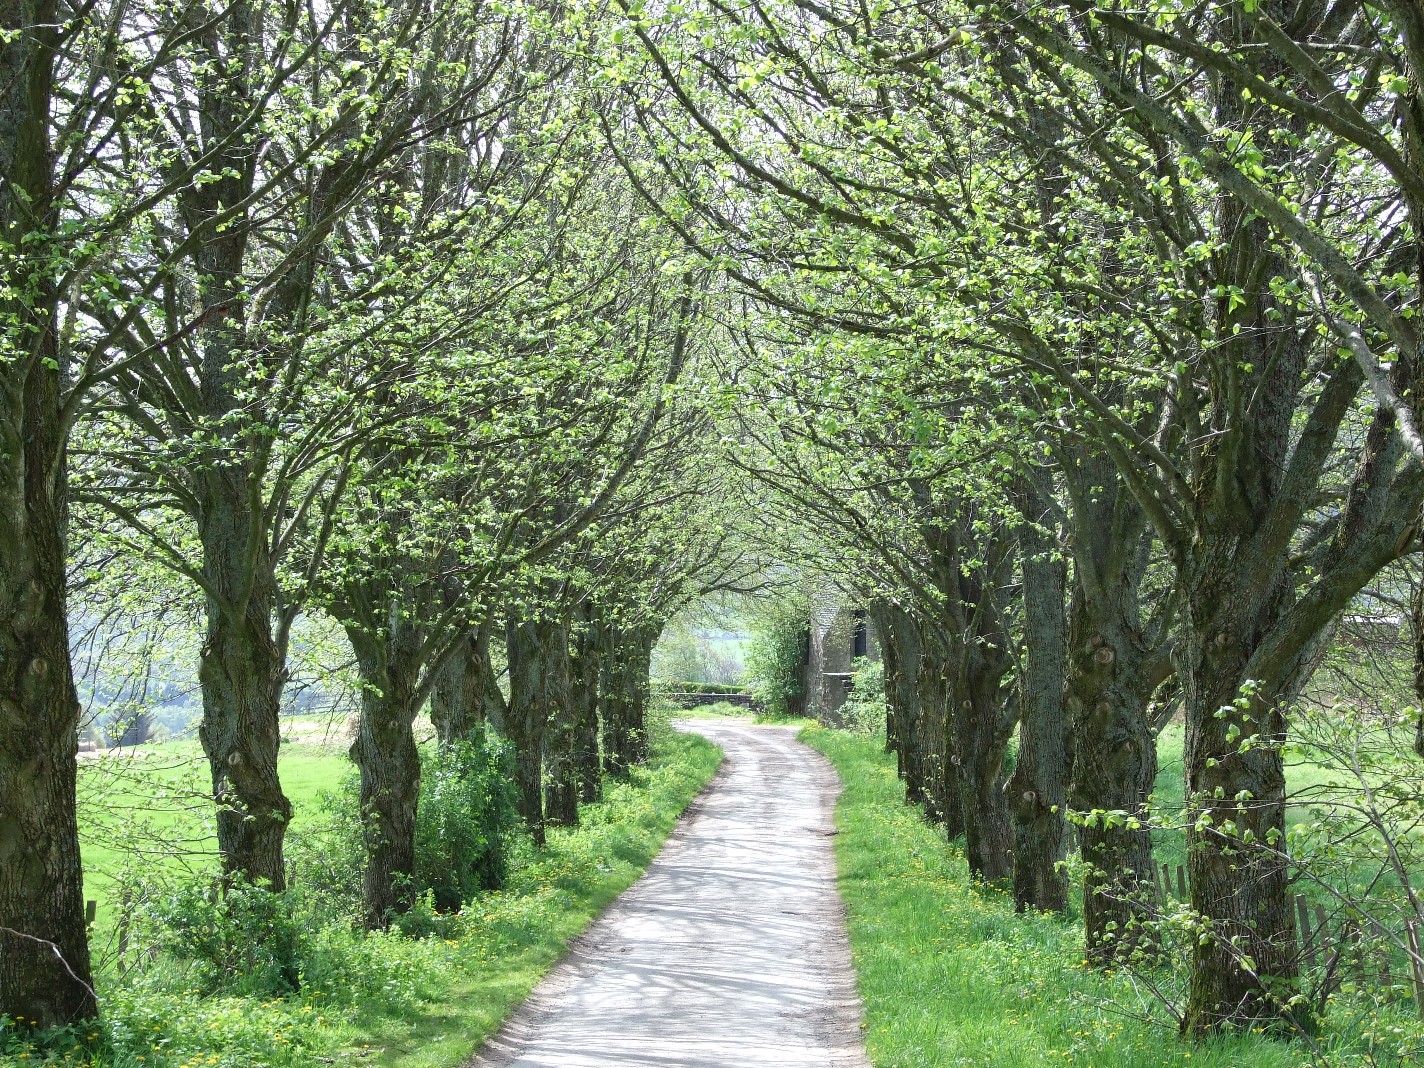 An alley of trees along a road with white blossom, green leaves and grassy verges.